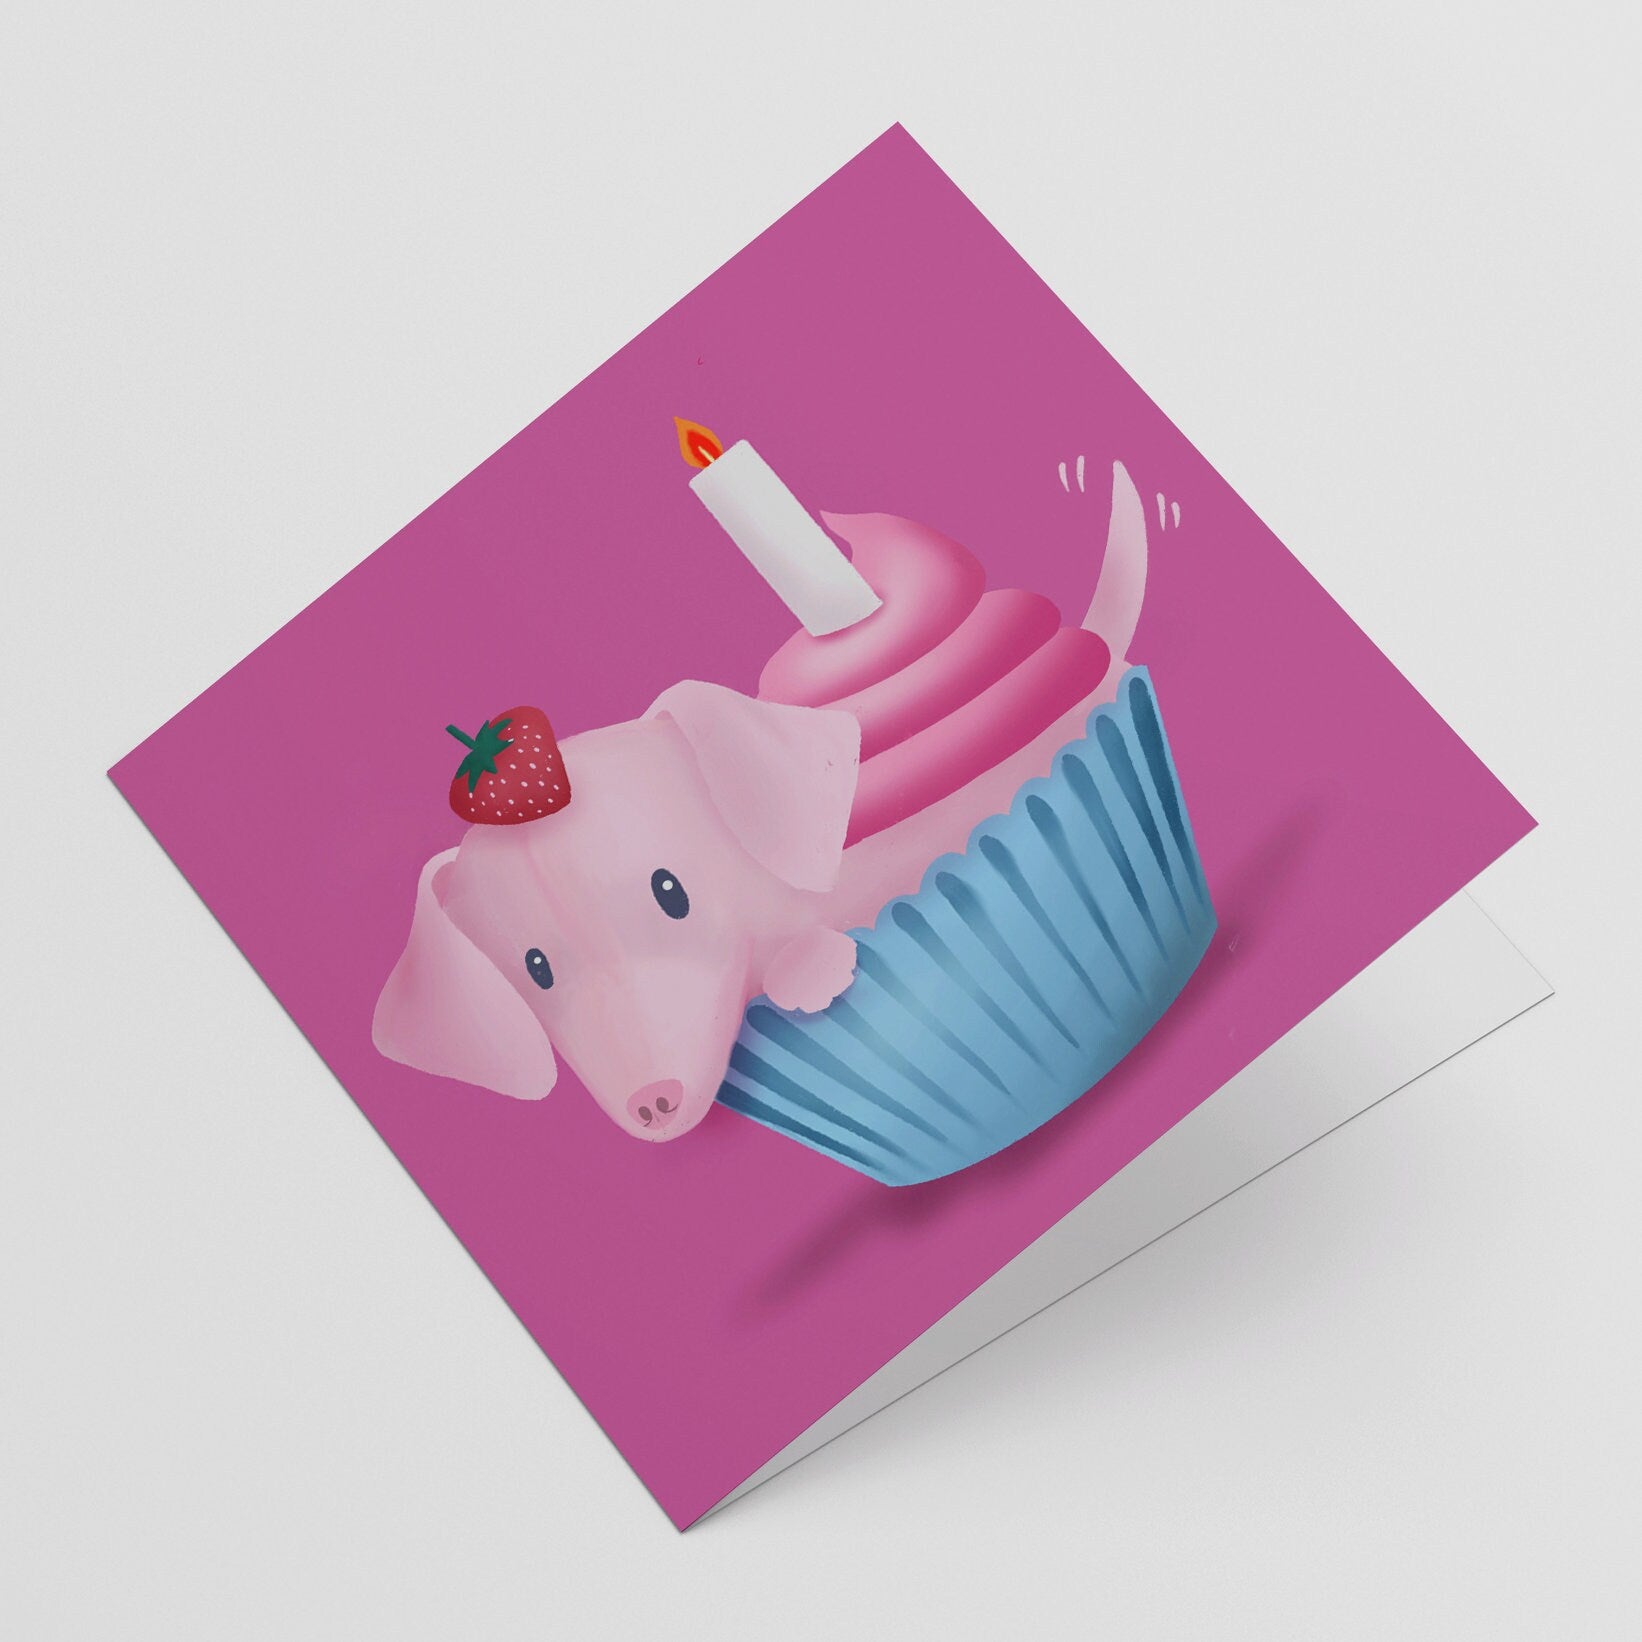 Cute Pink Dog in Cupcake, Birthday Greeting Card (feat. Piglet the Puppy)